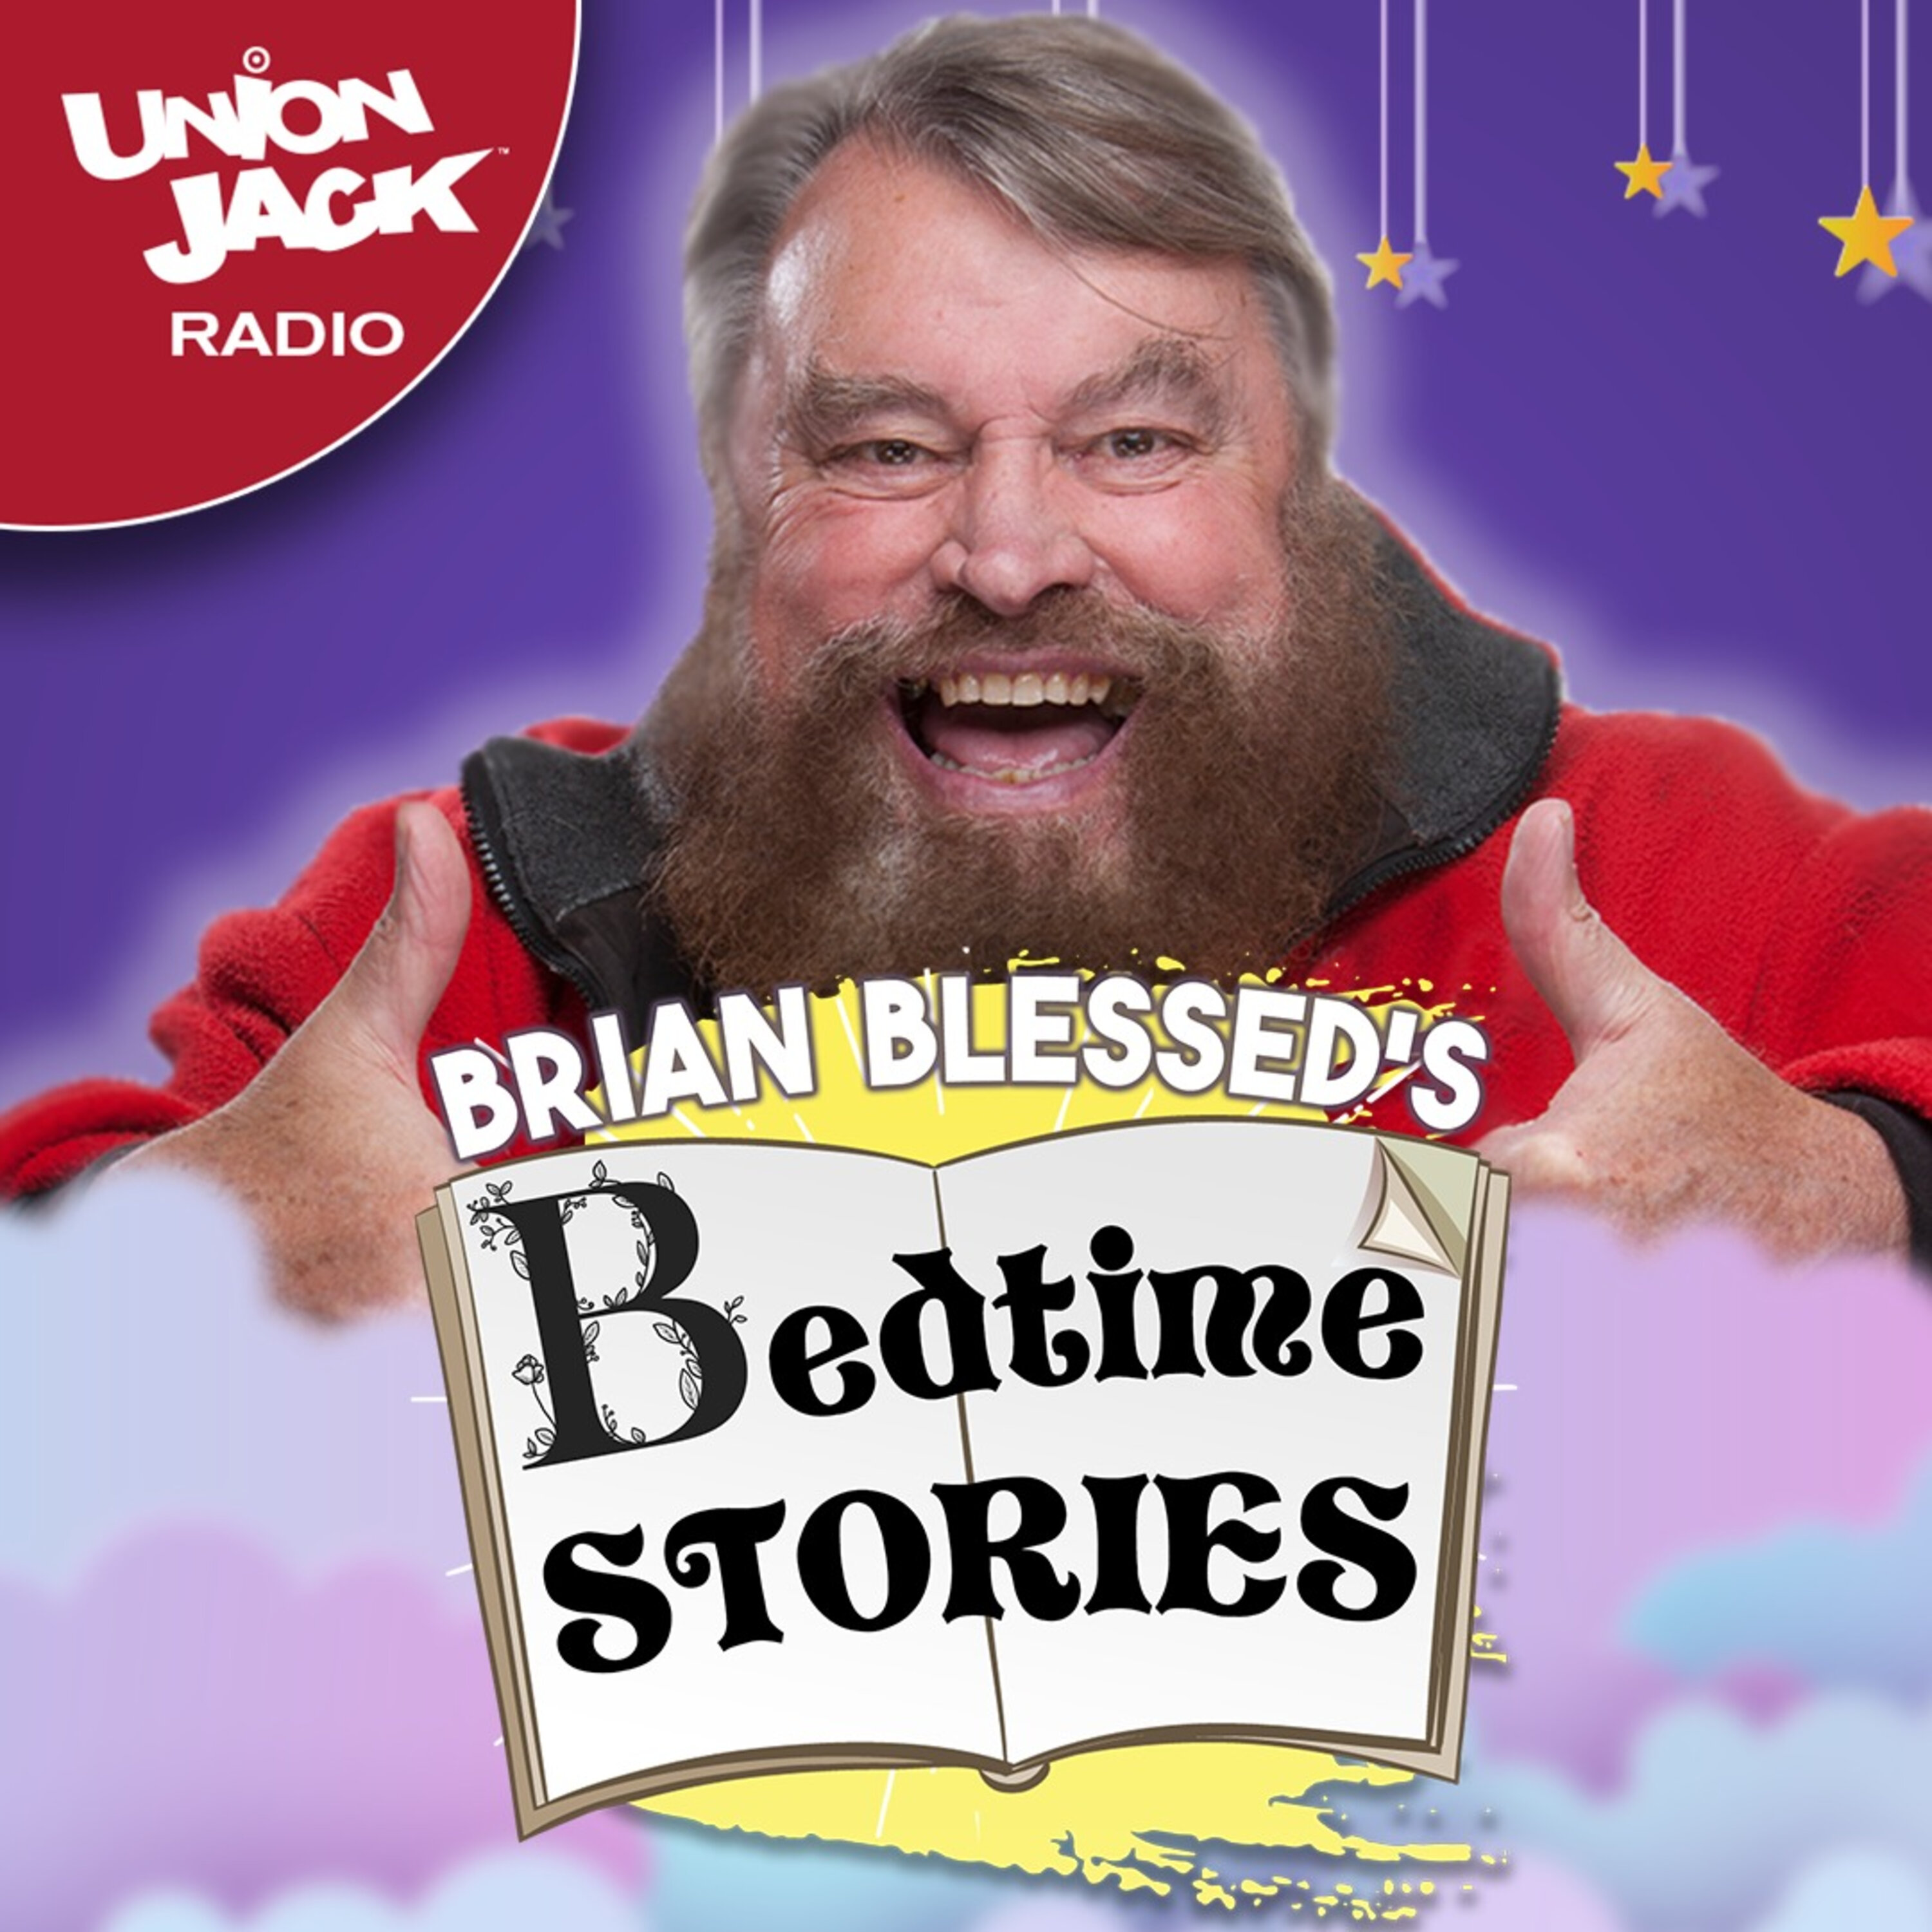 Brian Blessed's Bedtime Stories - starts Wed 9th Sept!